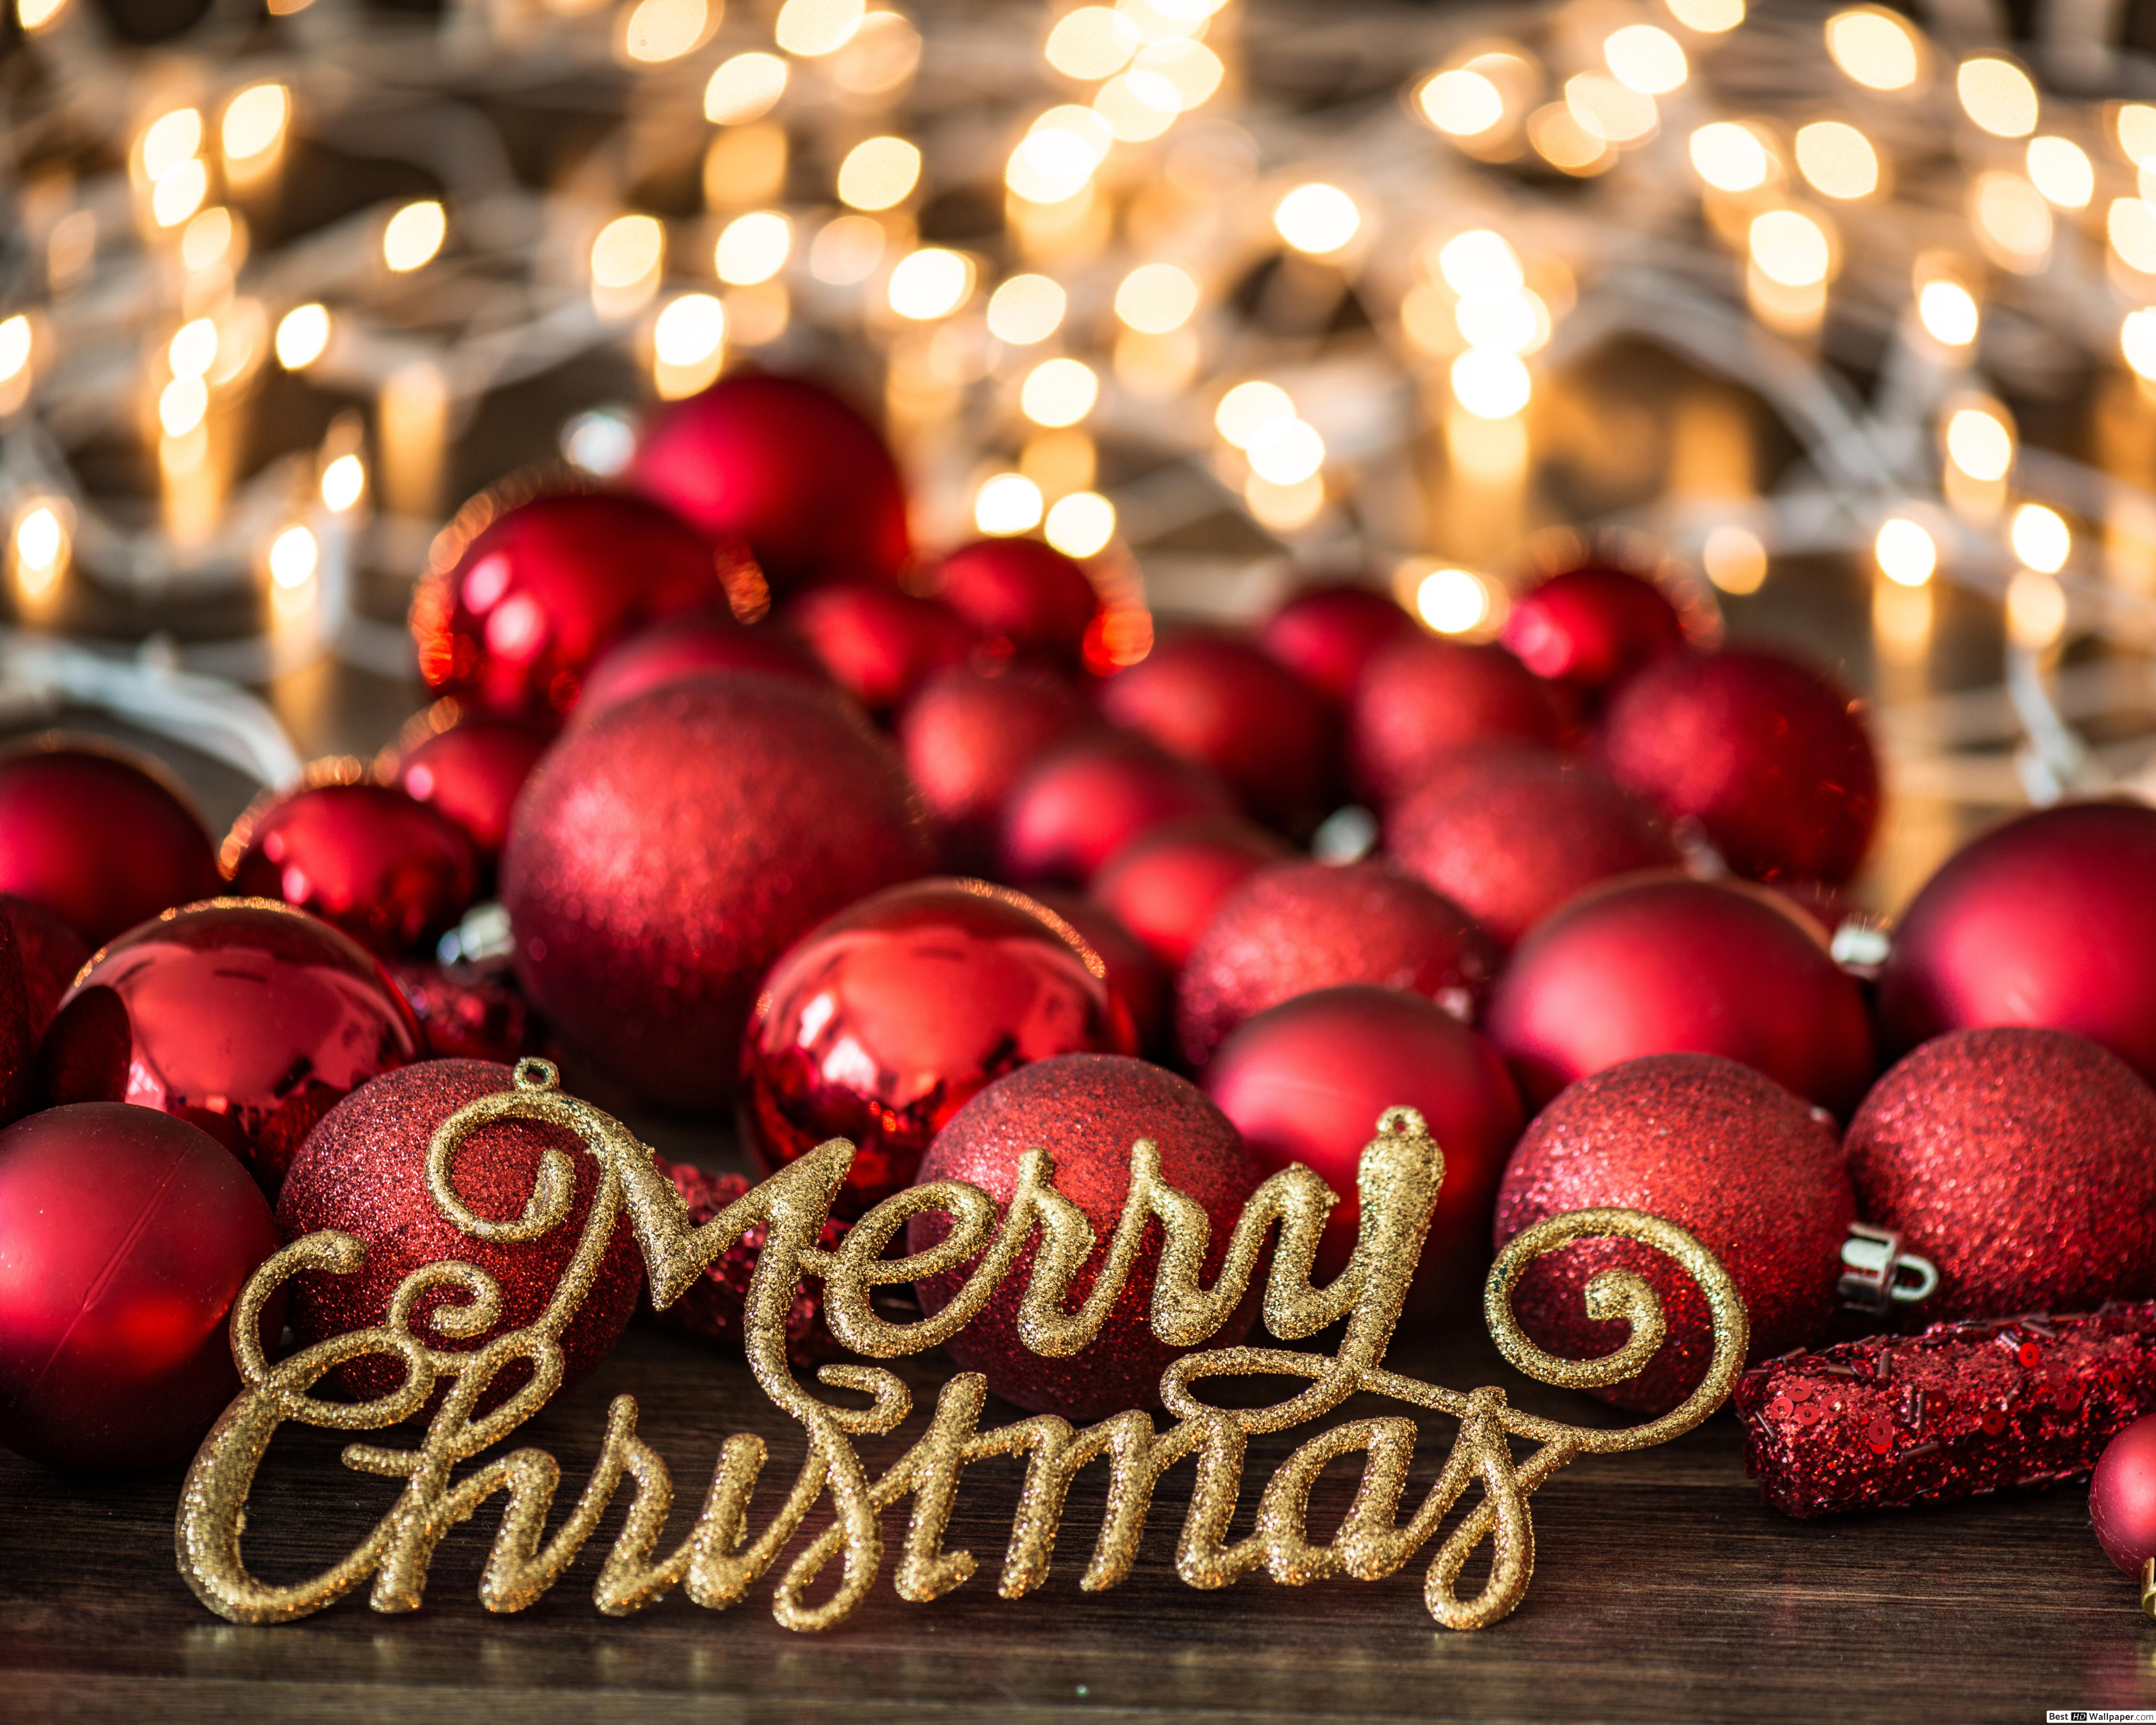 Merry Christmas Images New Thoughts - HD Wallpaper 